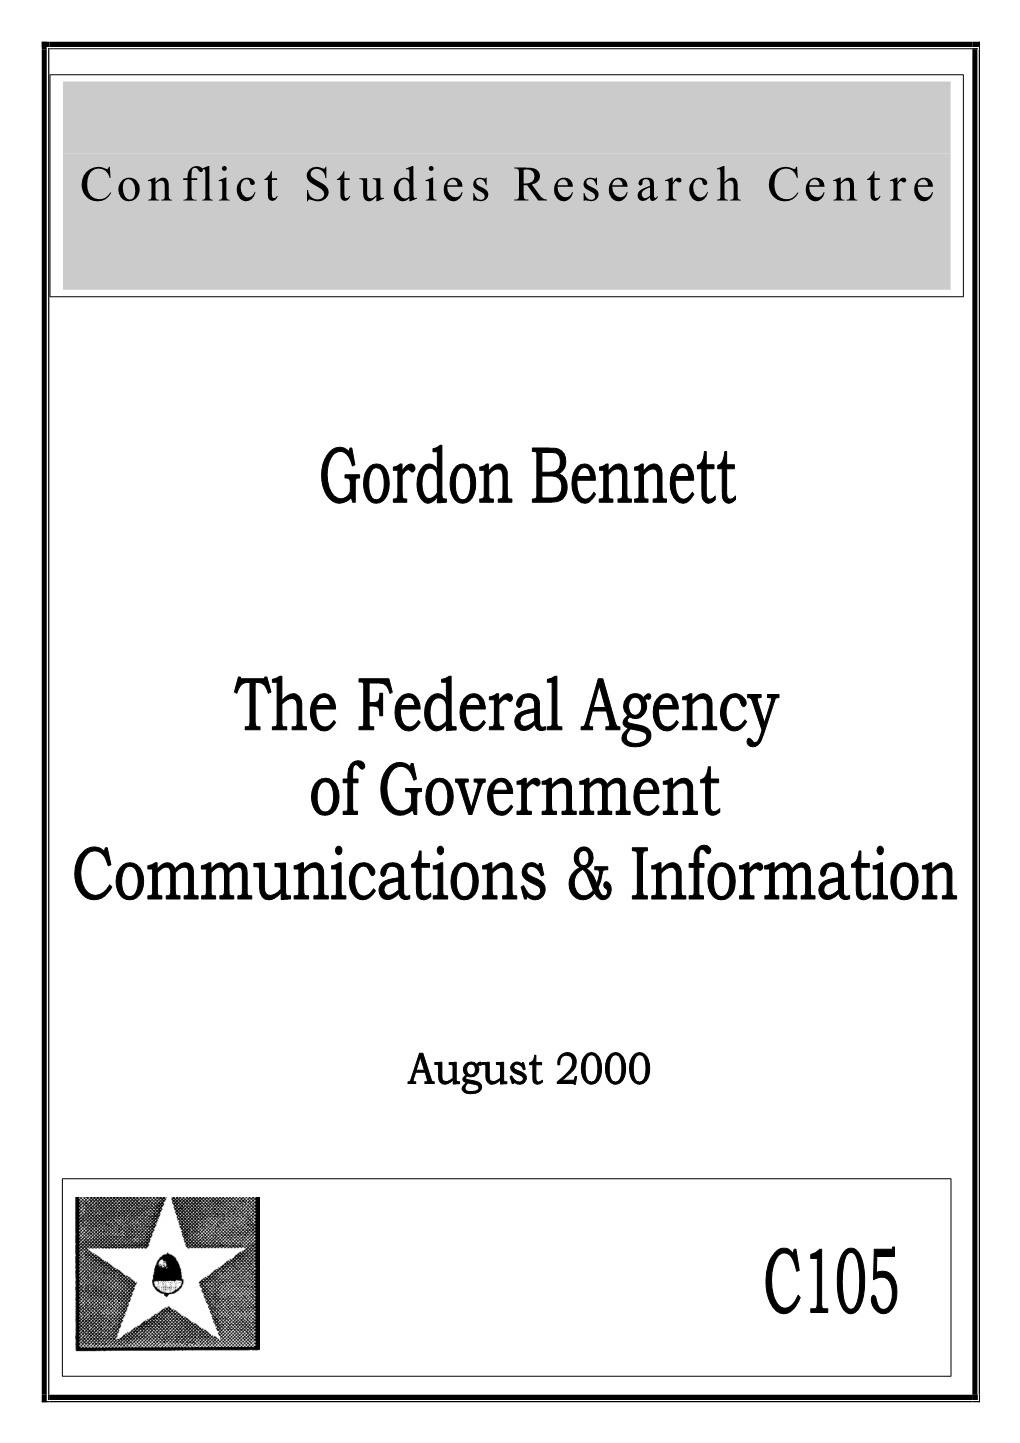 The Federal Agency of Government Communications & Information